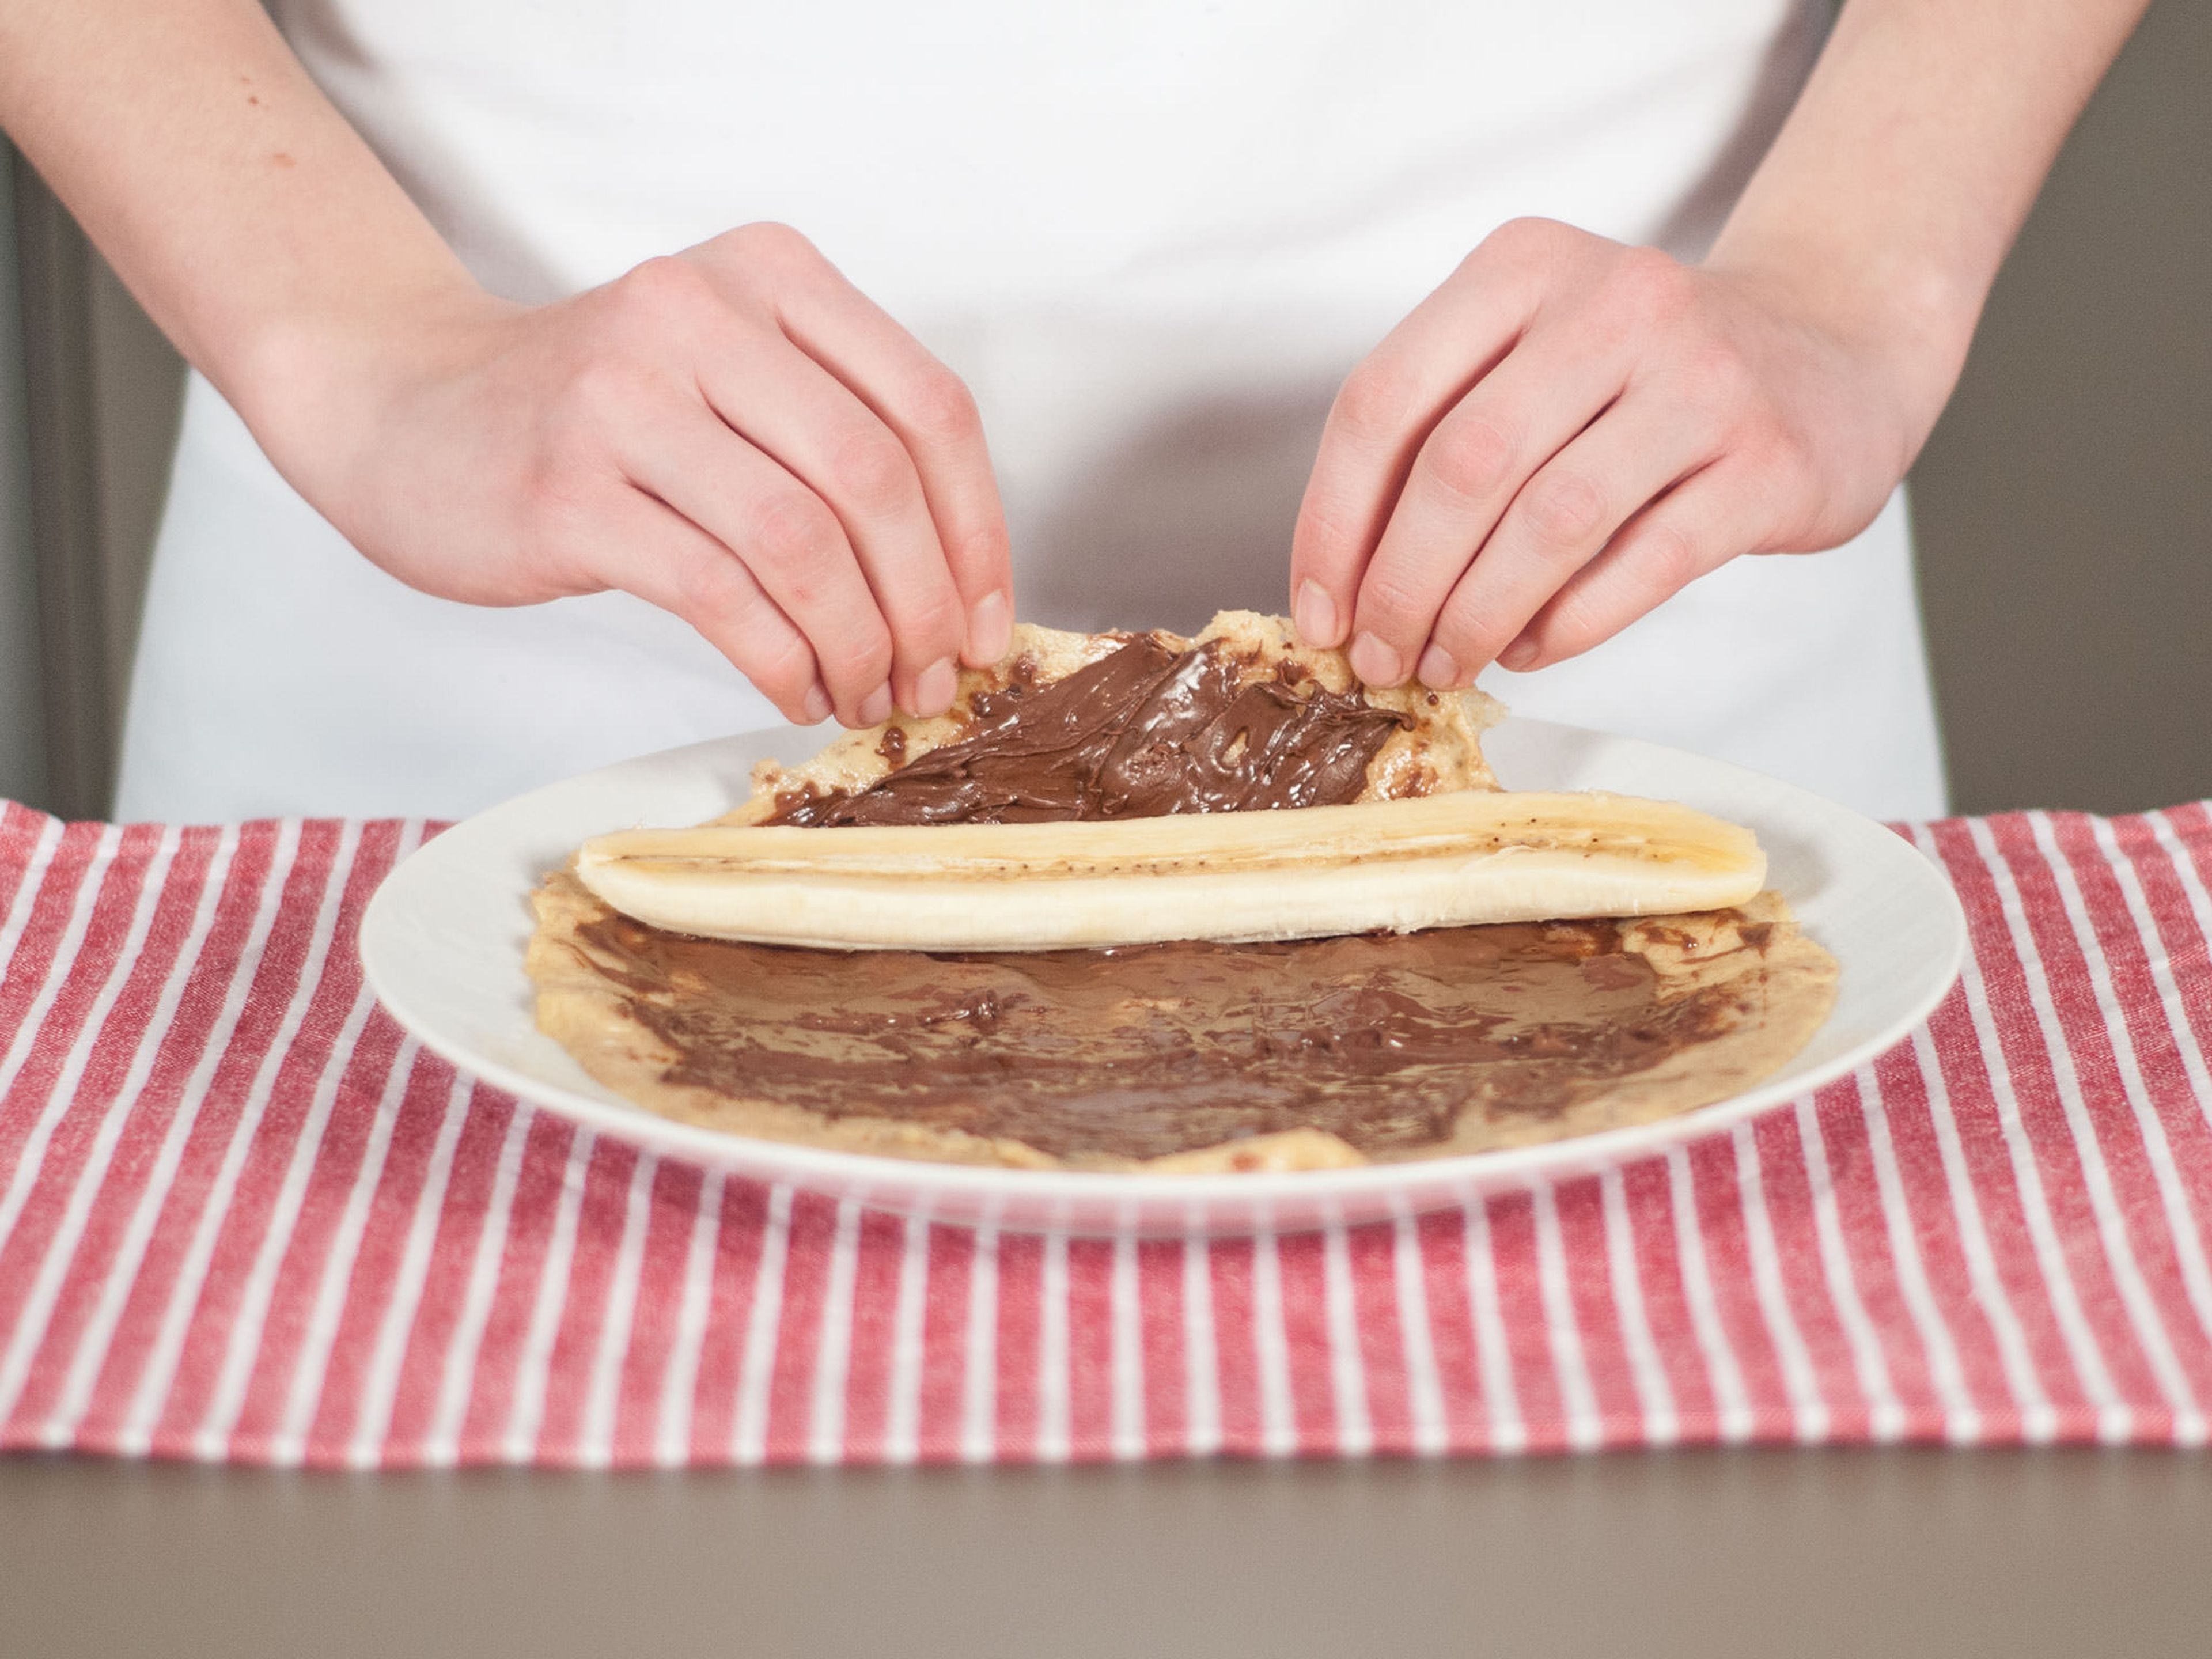 Spread a thin layer of hazelnut spread over each pancake. Place a banana slice on top and roll the pancake up. Enjoy with confectioner’s sugar, if desired.